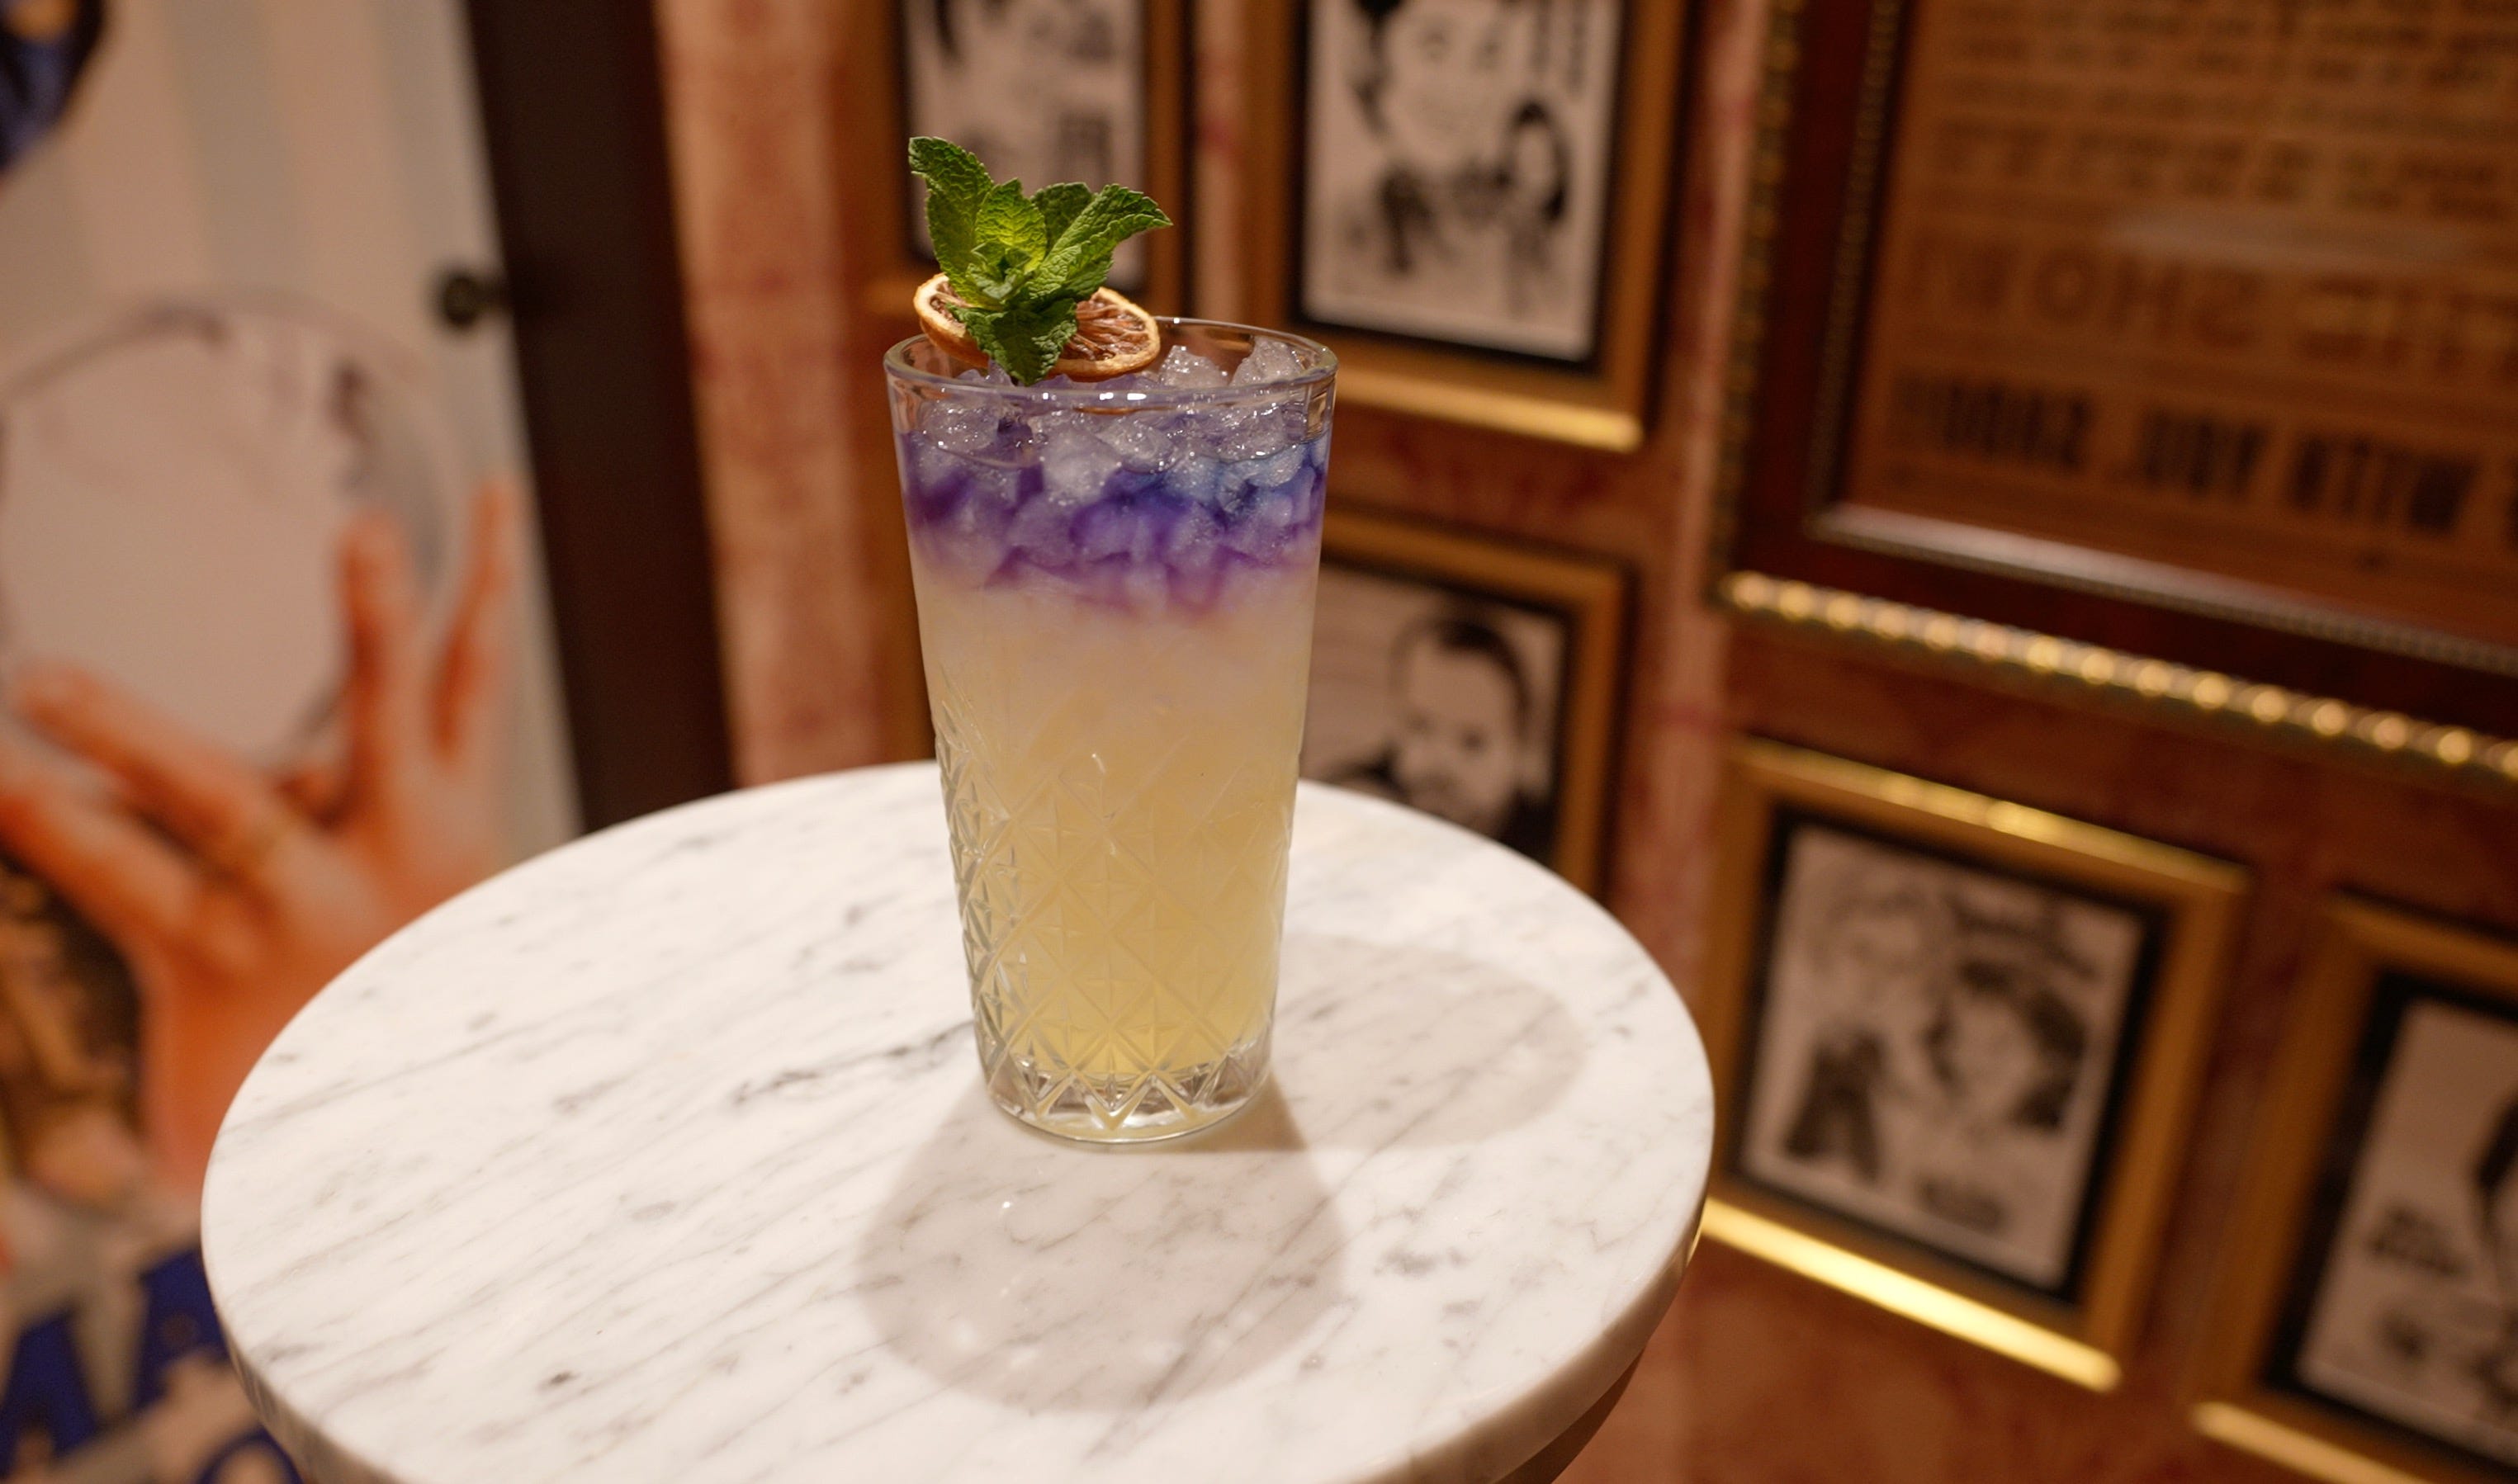 a ghost pianist and color-changing cocktails: inside princess cruises' hidden magic club